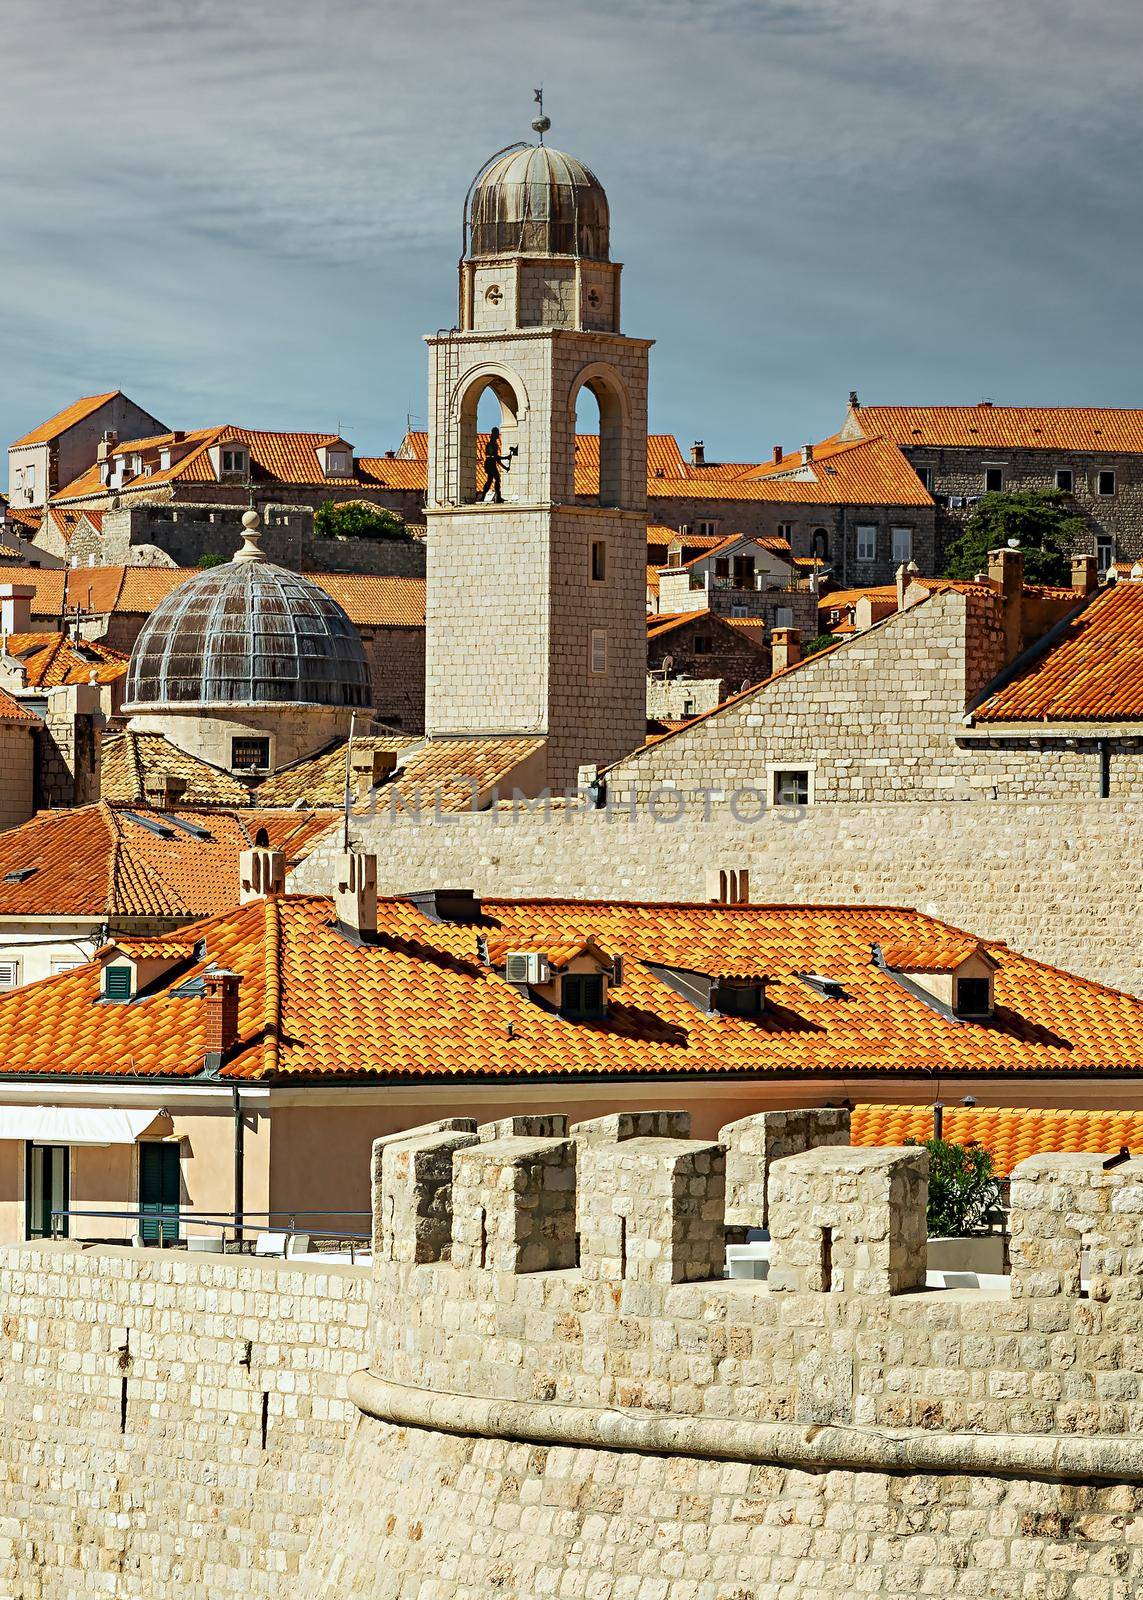 Croatia. South Dalmatia. View of the old town Dubrovnik. by seka33